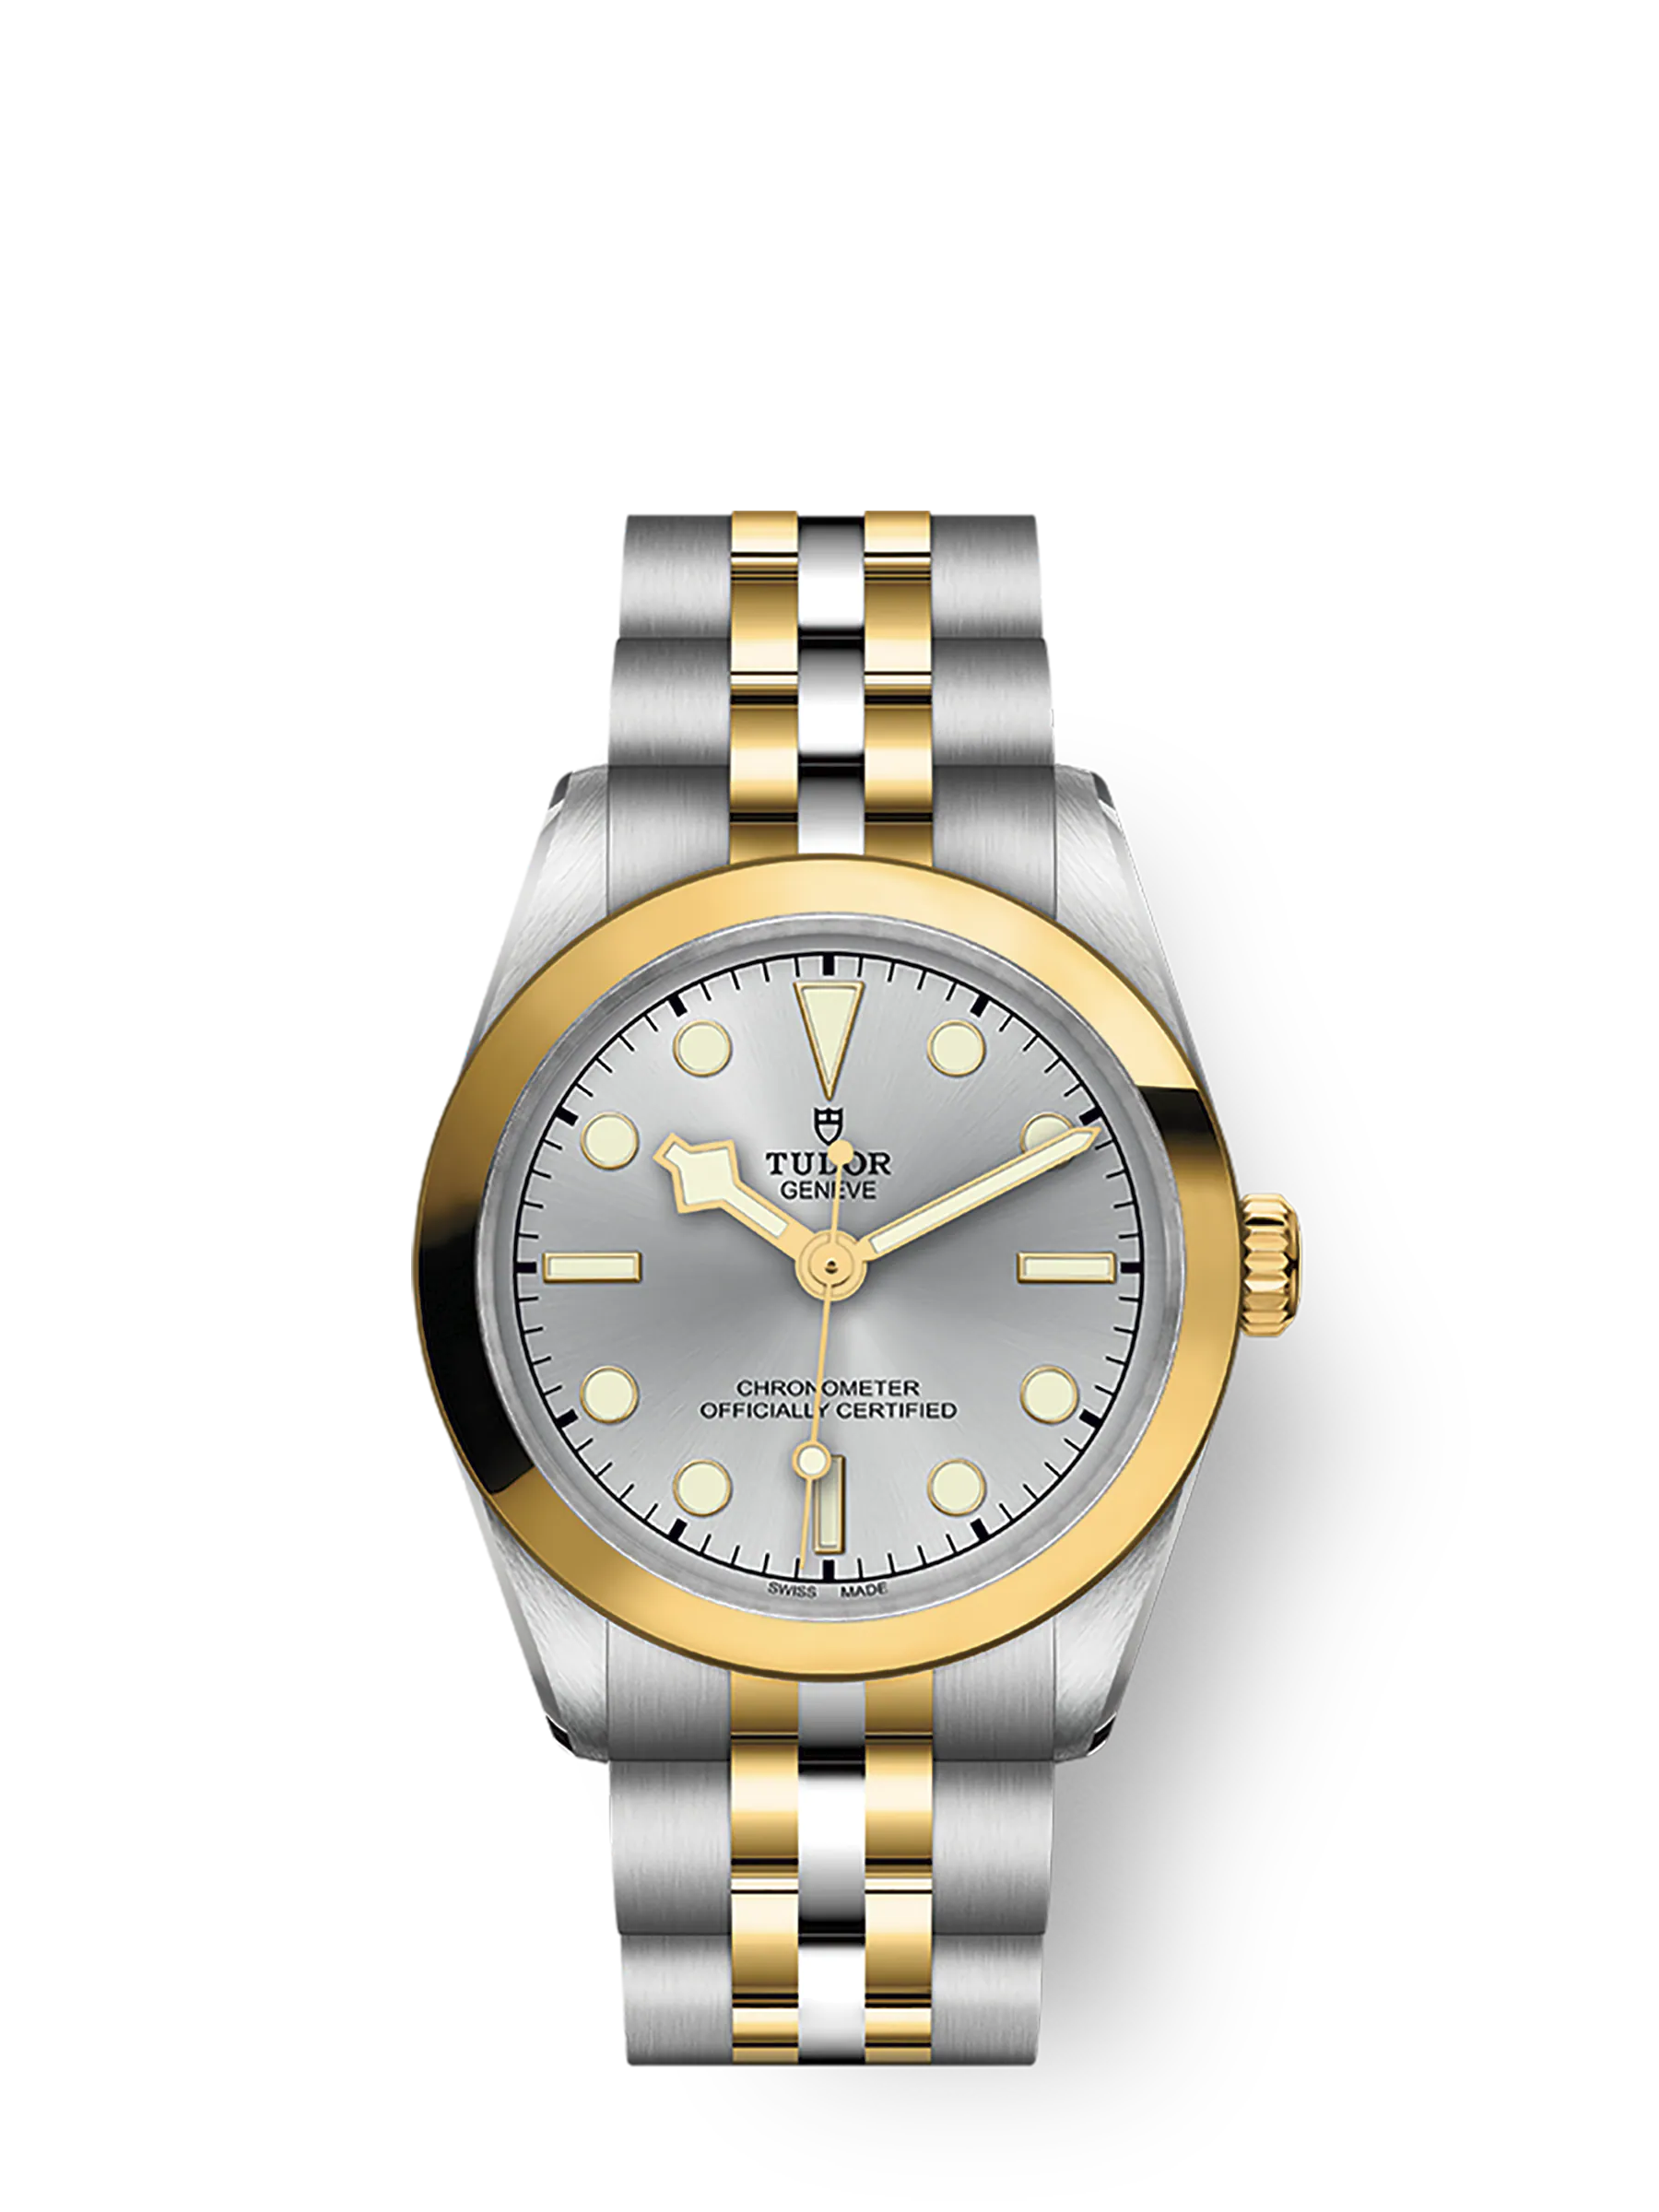 Tudor Black Bay 39 S&G, Stainless Steel and 18k Yellow Gold, Ref# M79663-0002